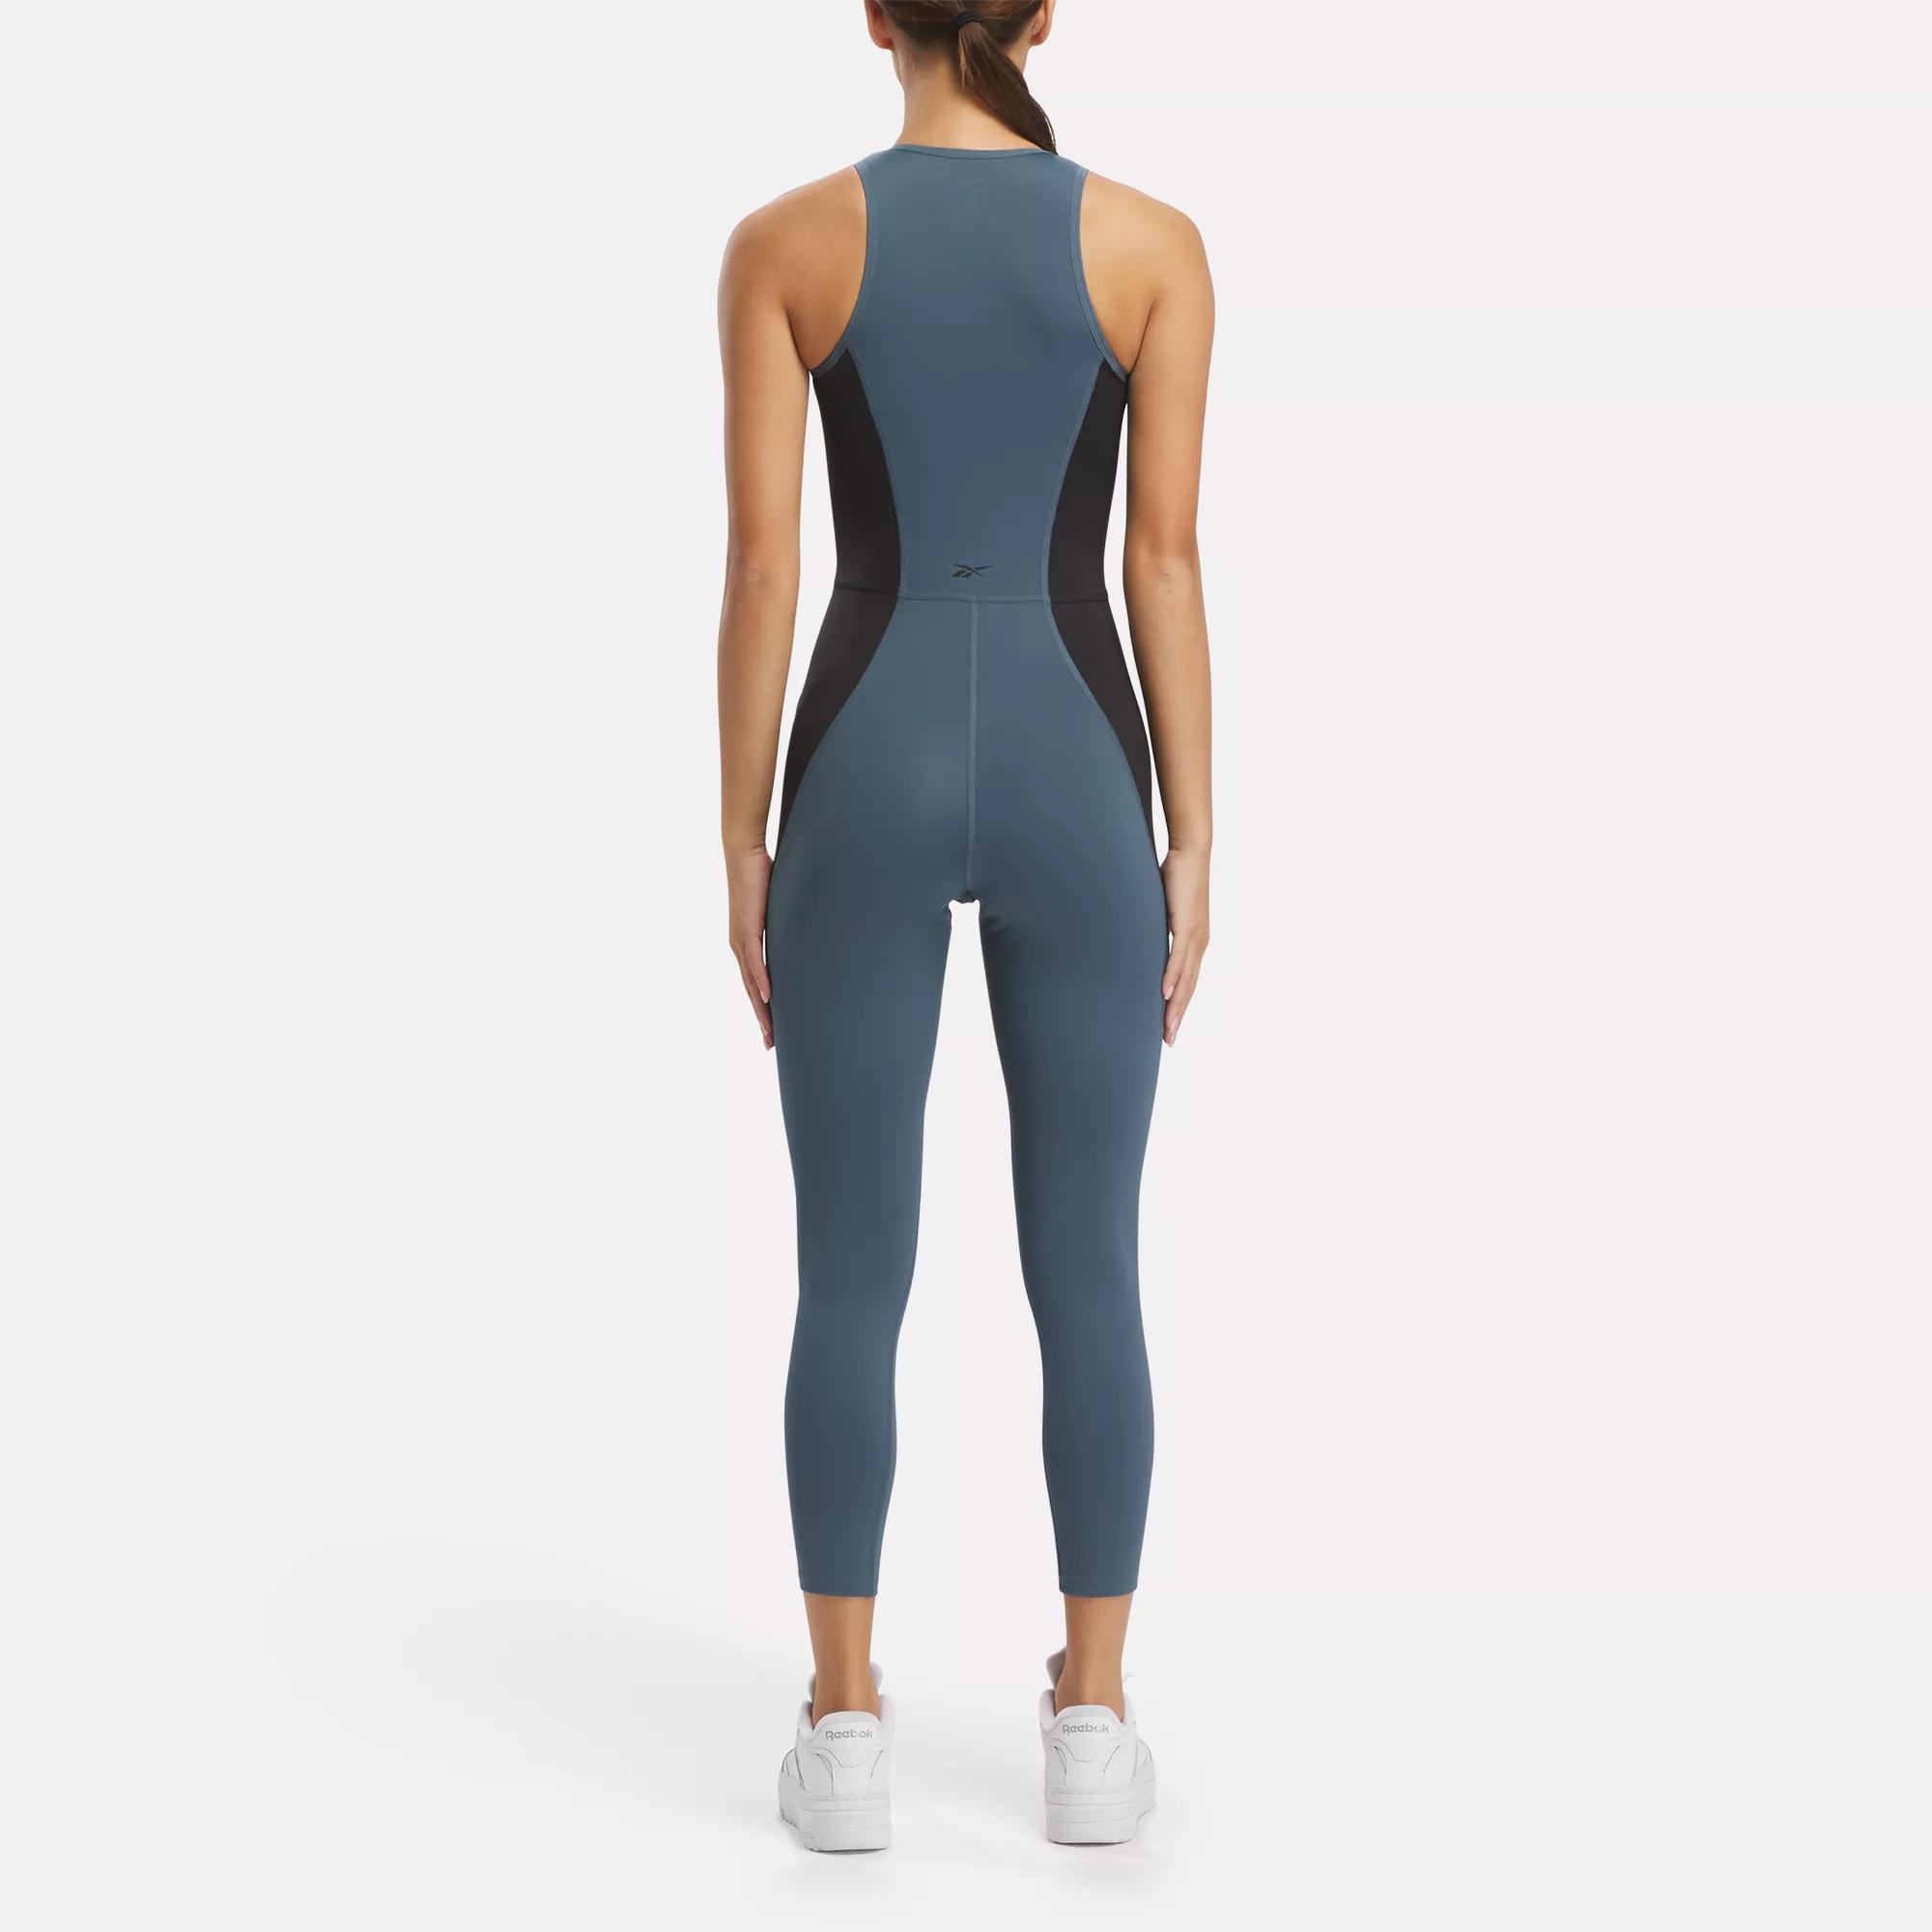 Luxxy Fit Body Suit Review